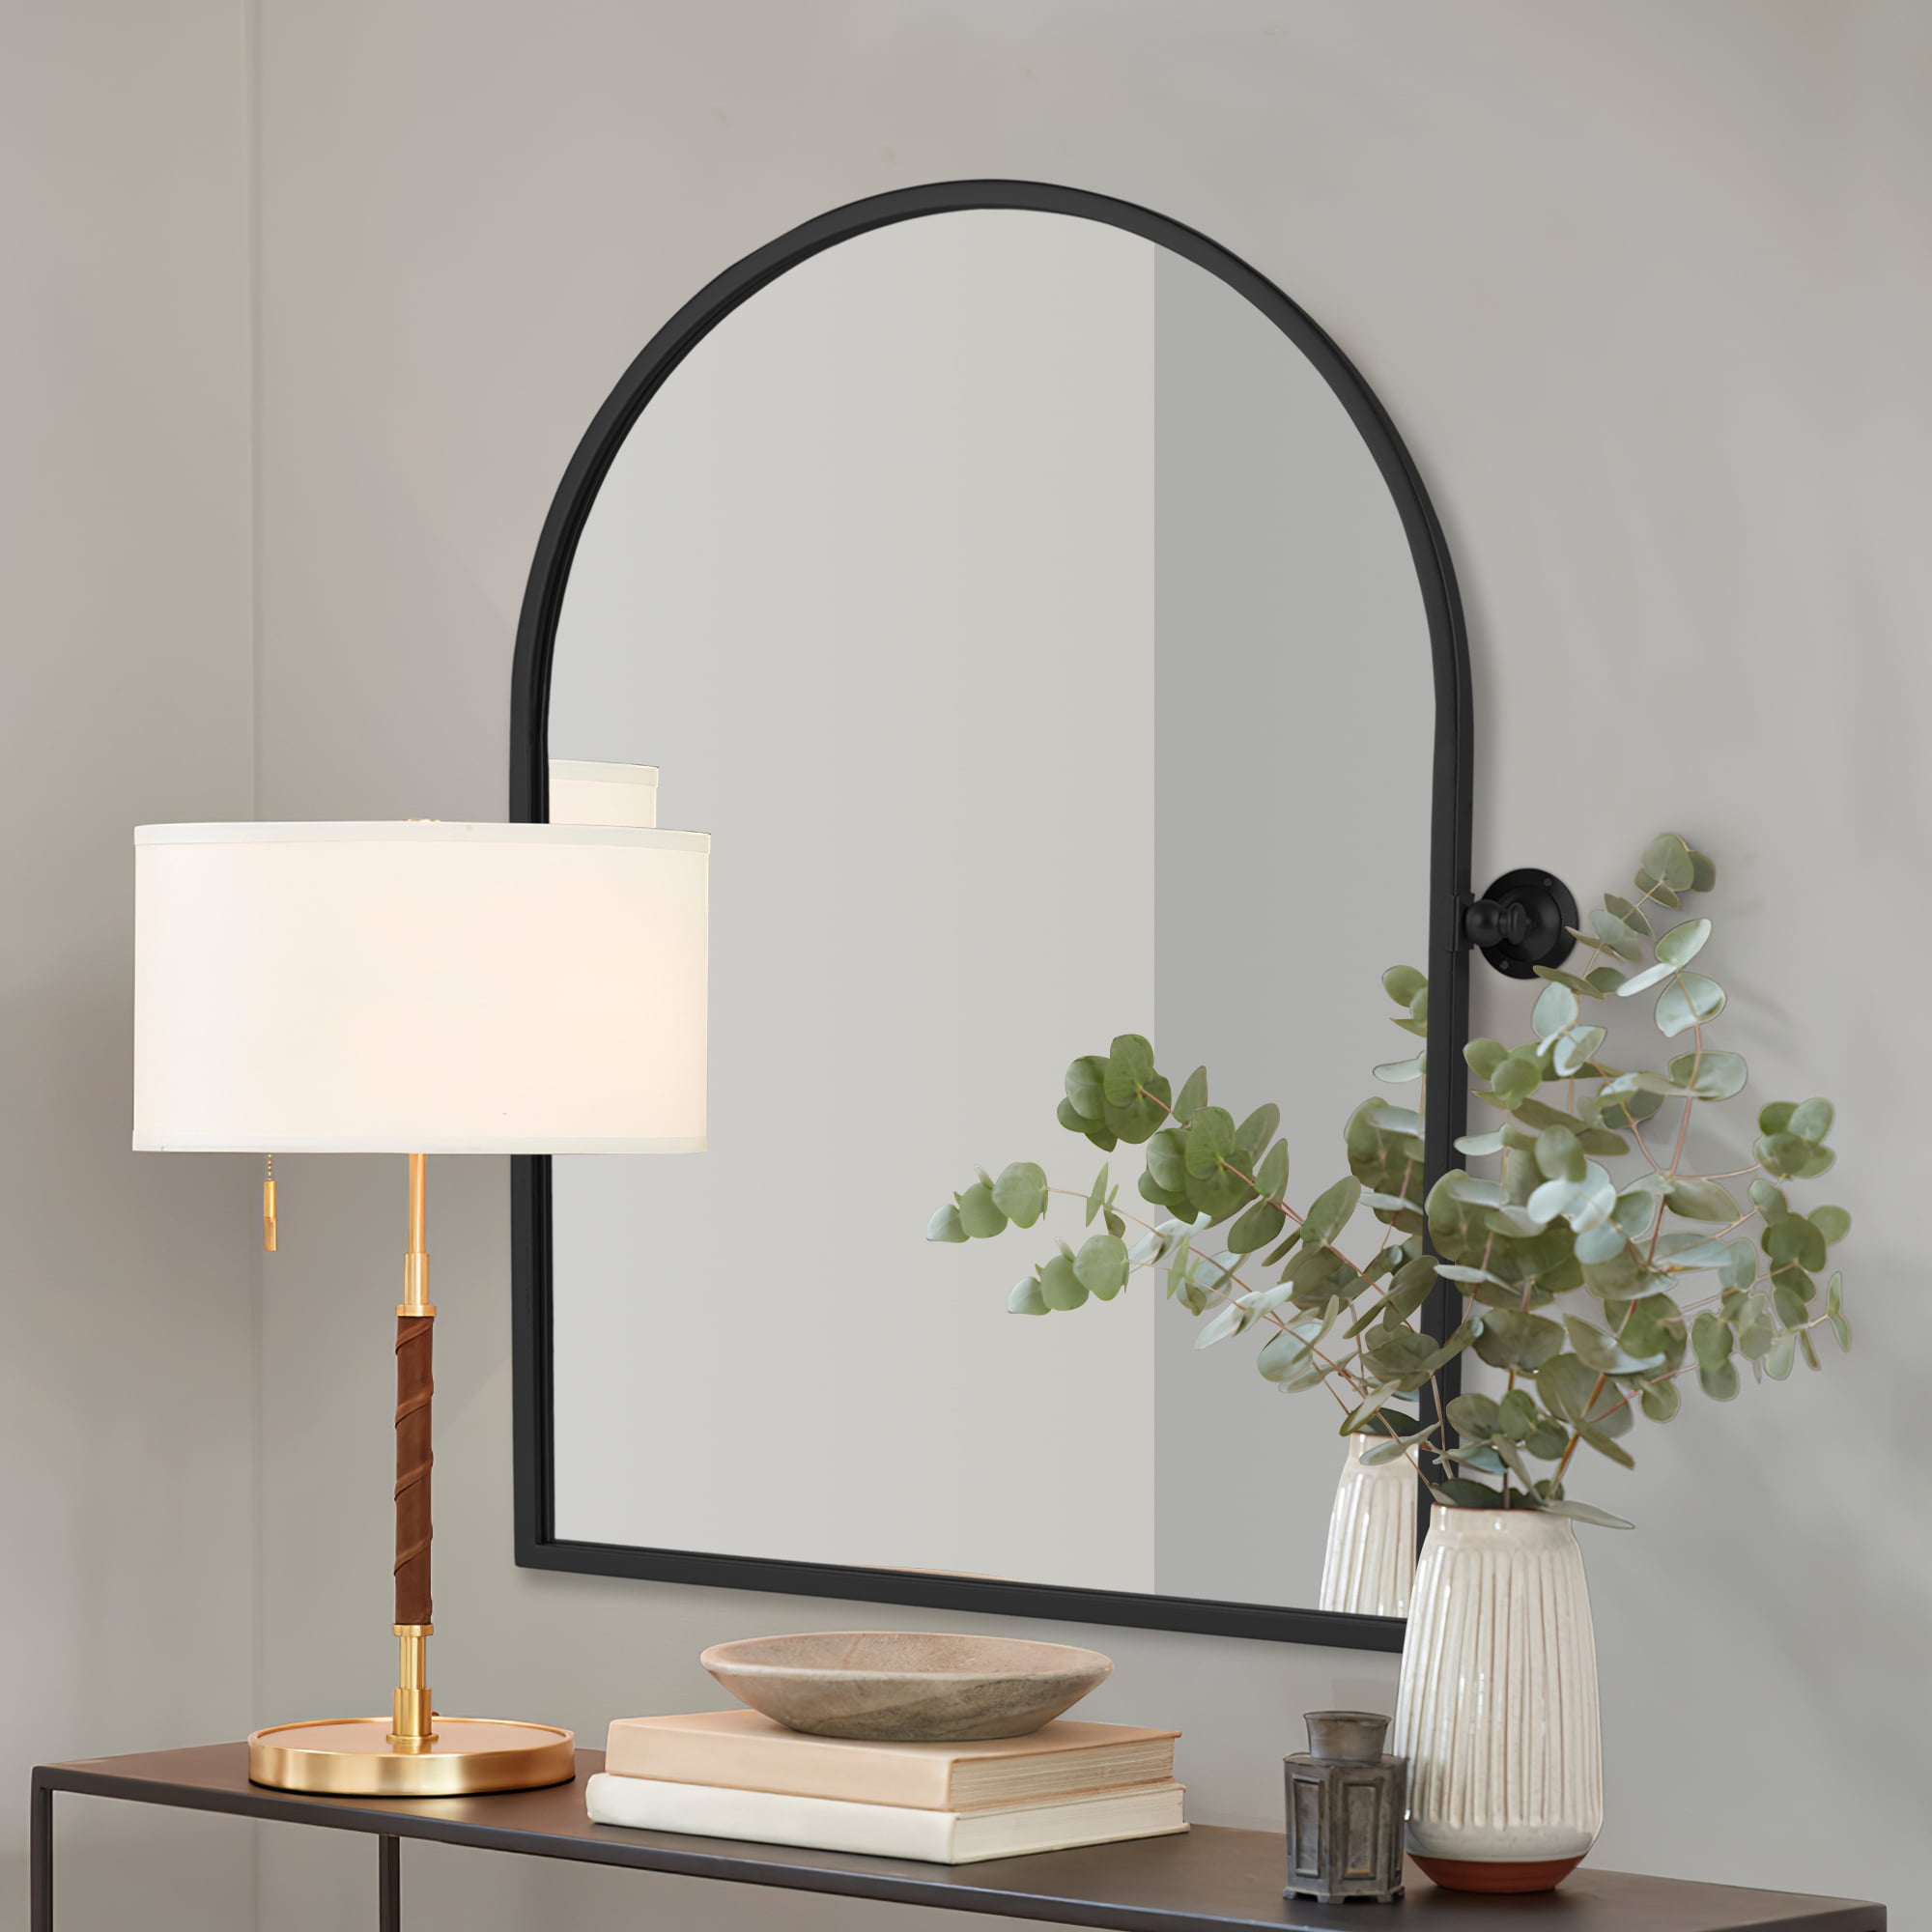 Neutype Modern Arched Wall Mirror Small Arch Mirror Right Angle Mirror 38 inchx26 inch,Sliver,Iron, Size: 38x26, Silver